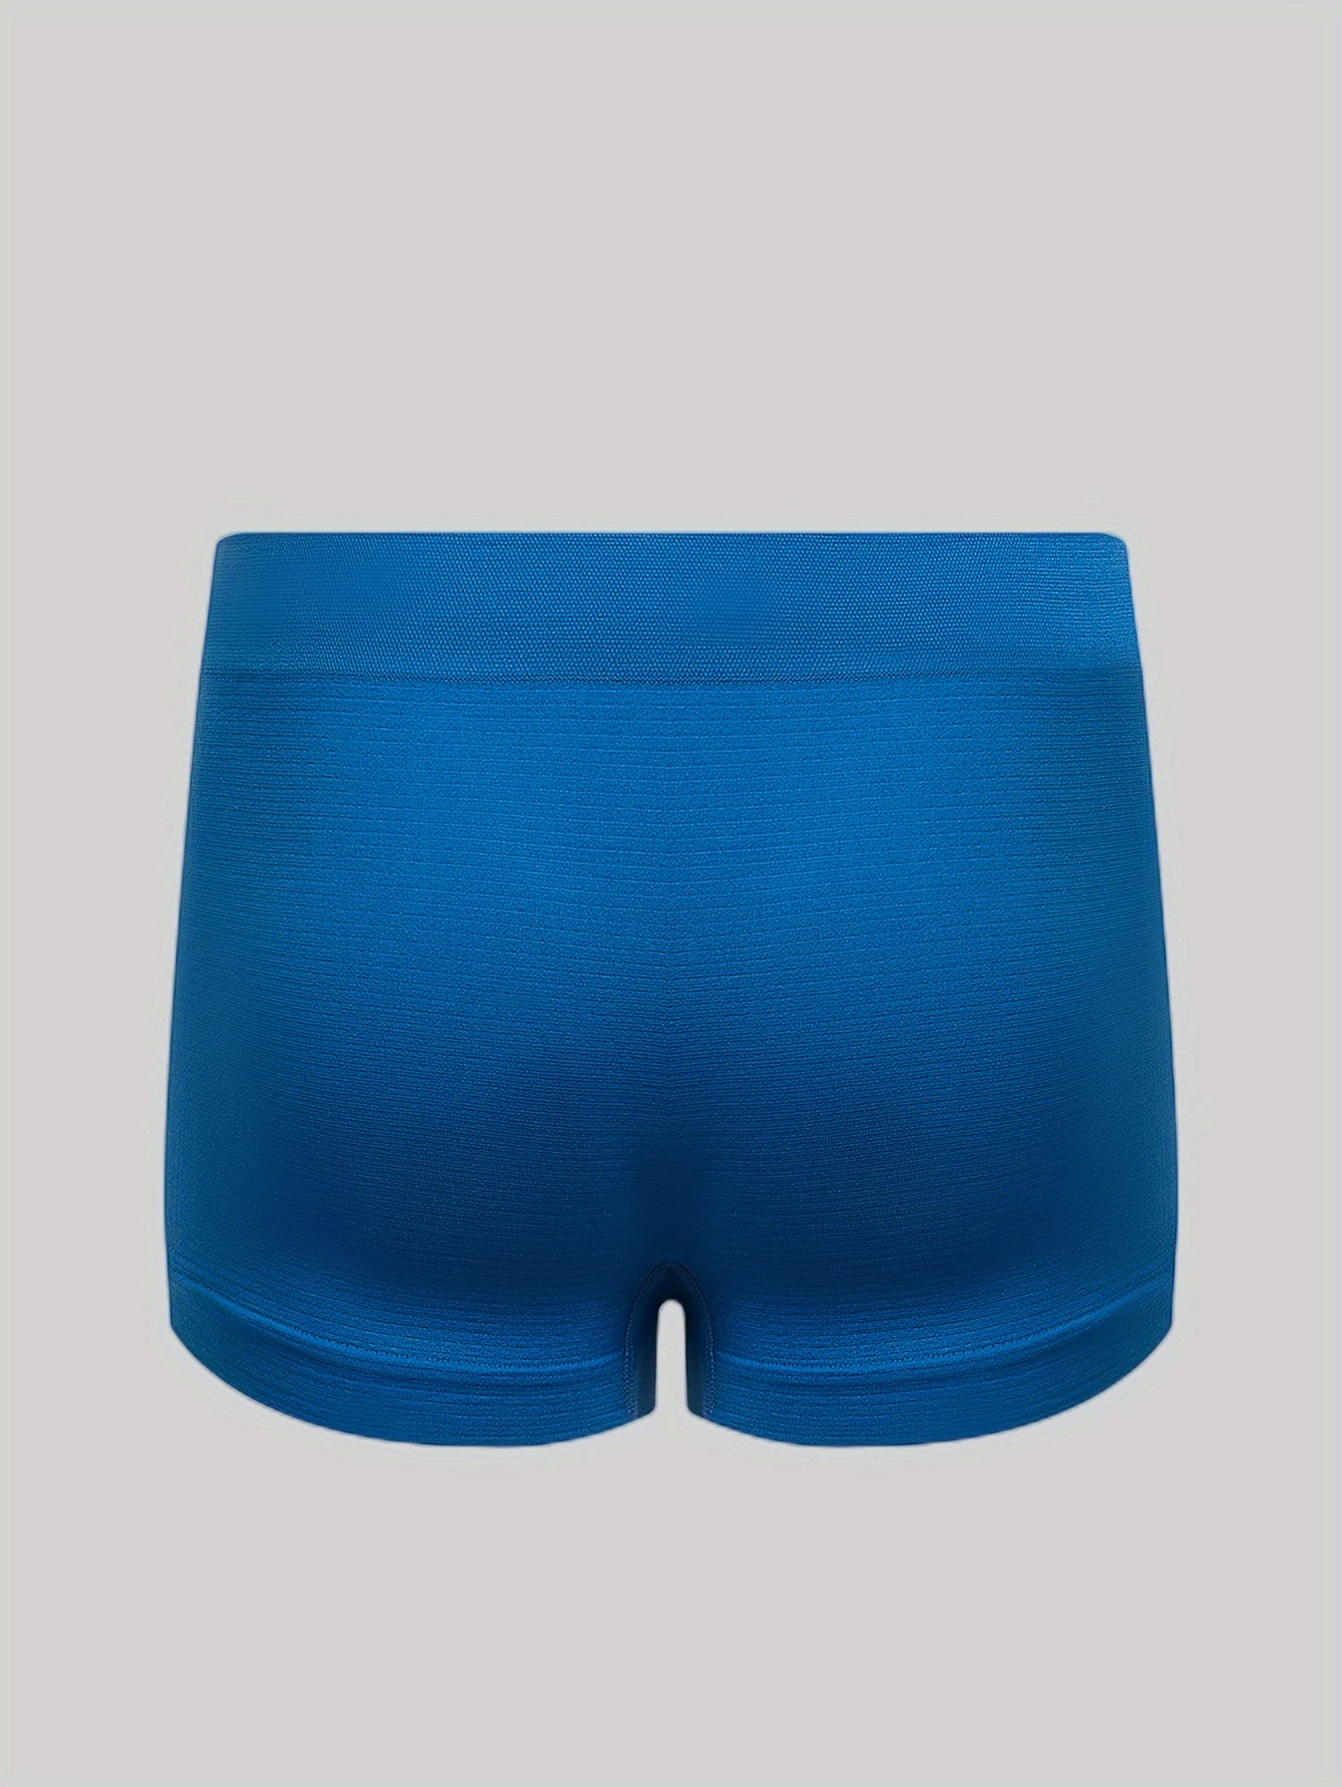 Soft cute briefs for men For Comfort 